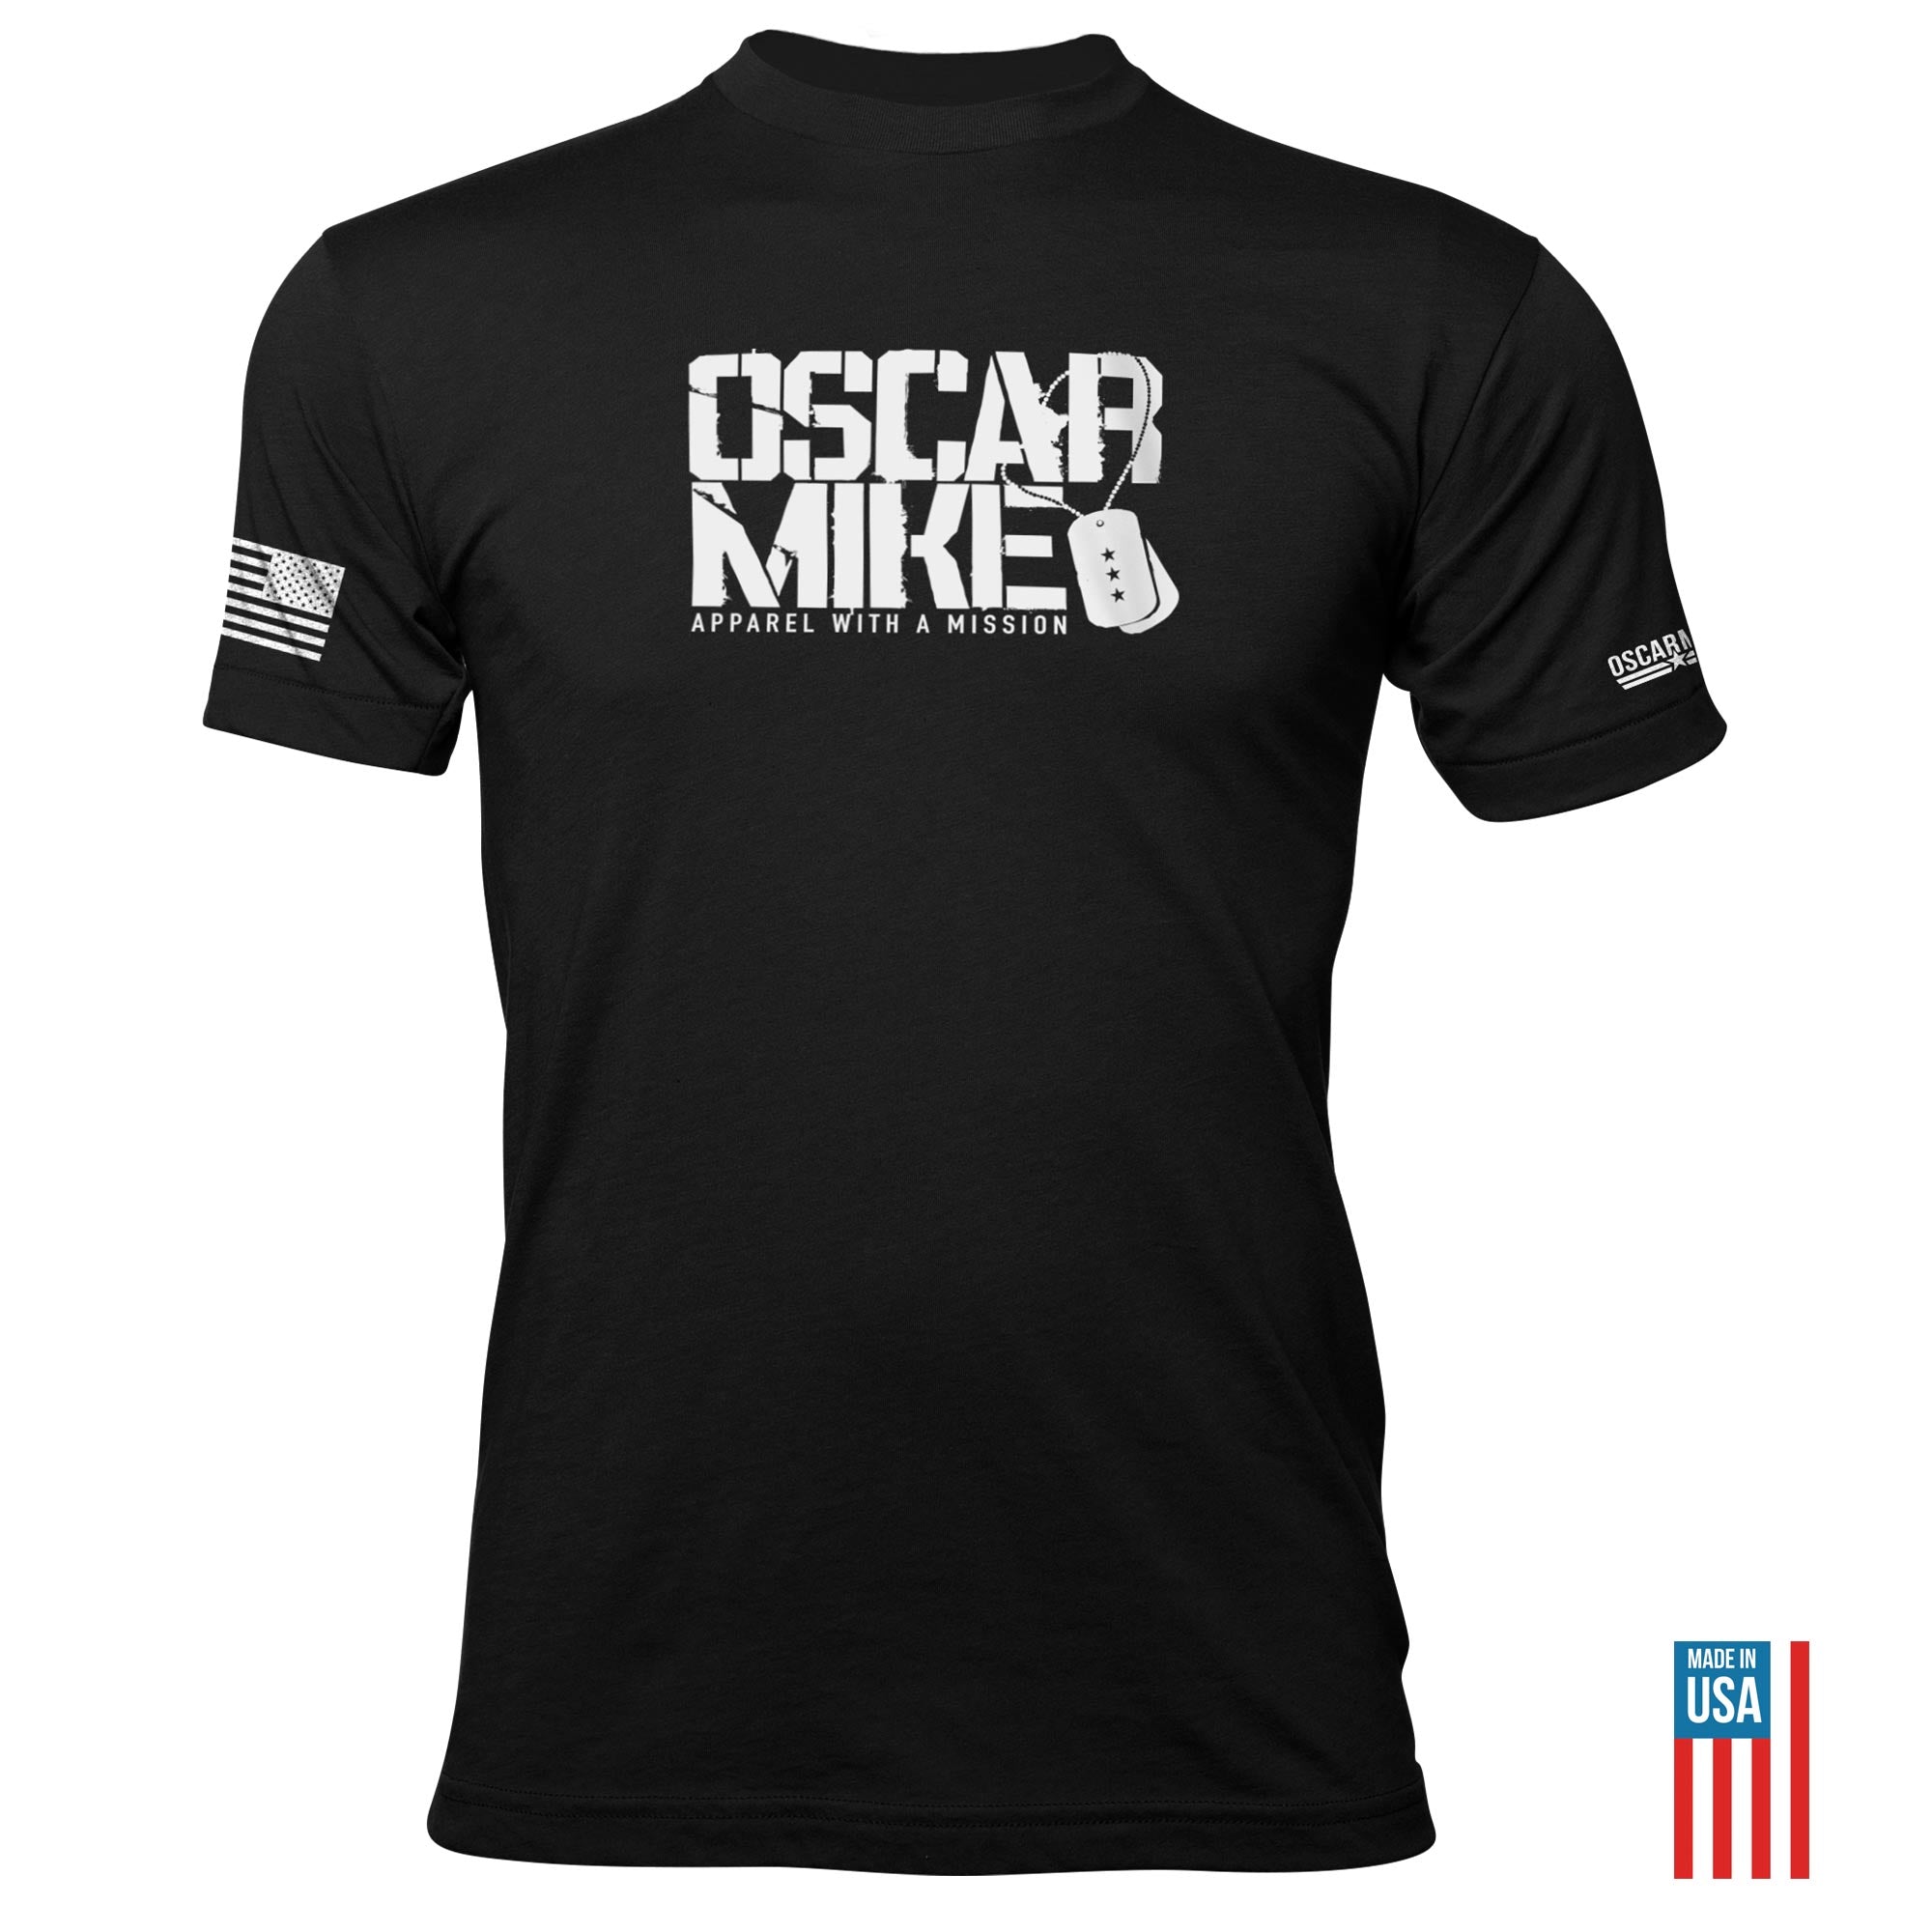 Dog Tags Tee T-Shirt from Oscar Mike Apparel